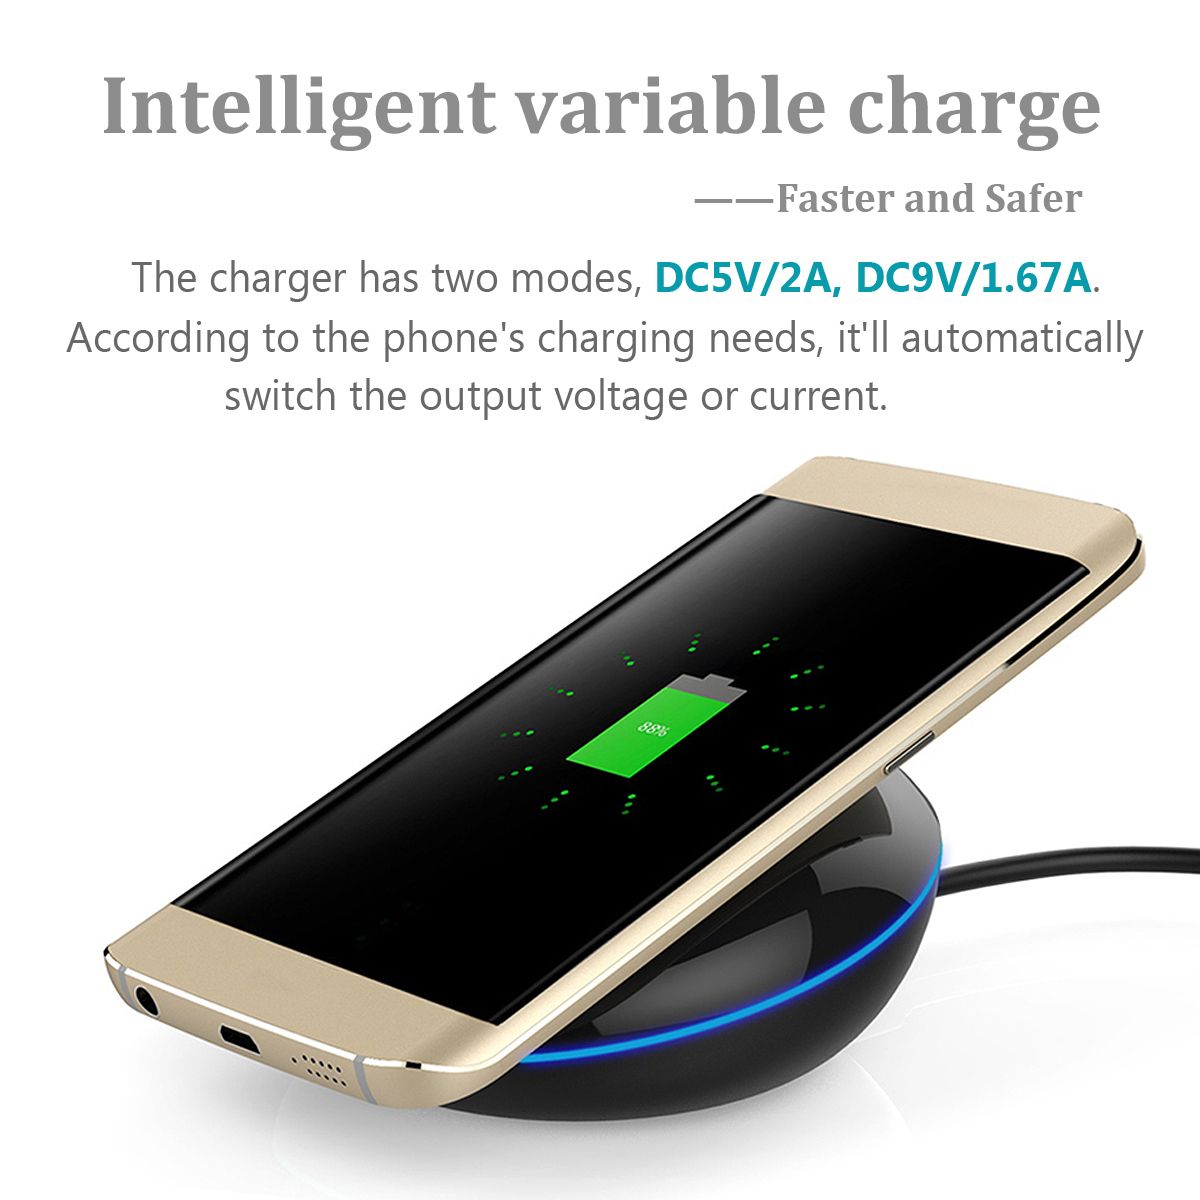 Bakeey-Qi-Wireless-Fast-Charger-With-LED-Indicator-For-iPhone-X-8Plus-Samsung-S7-S8-Note-8-1217829